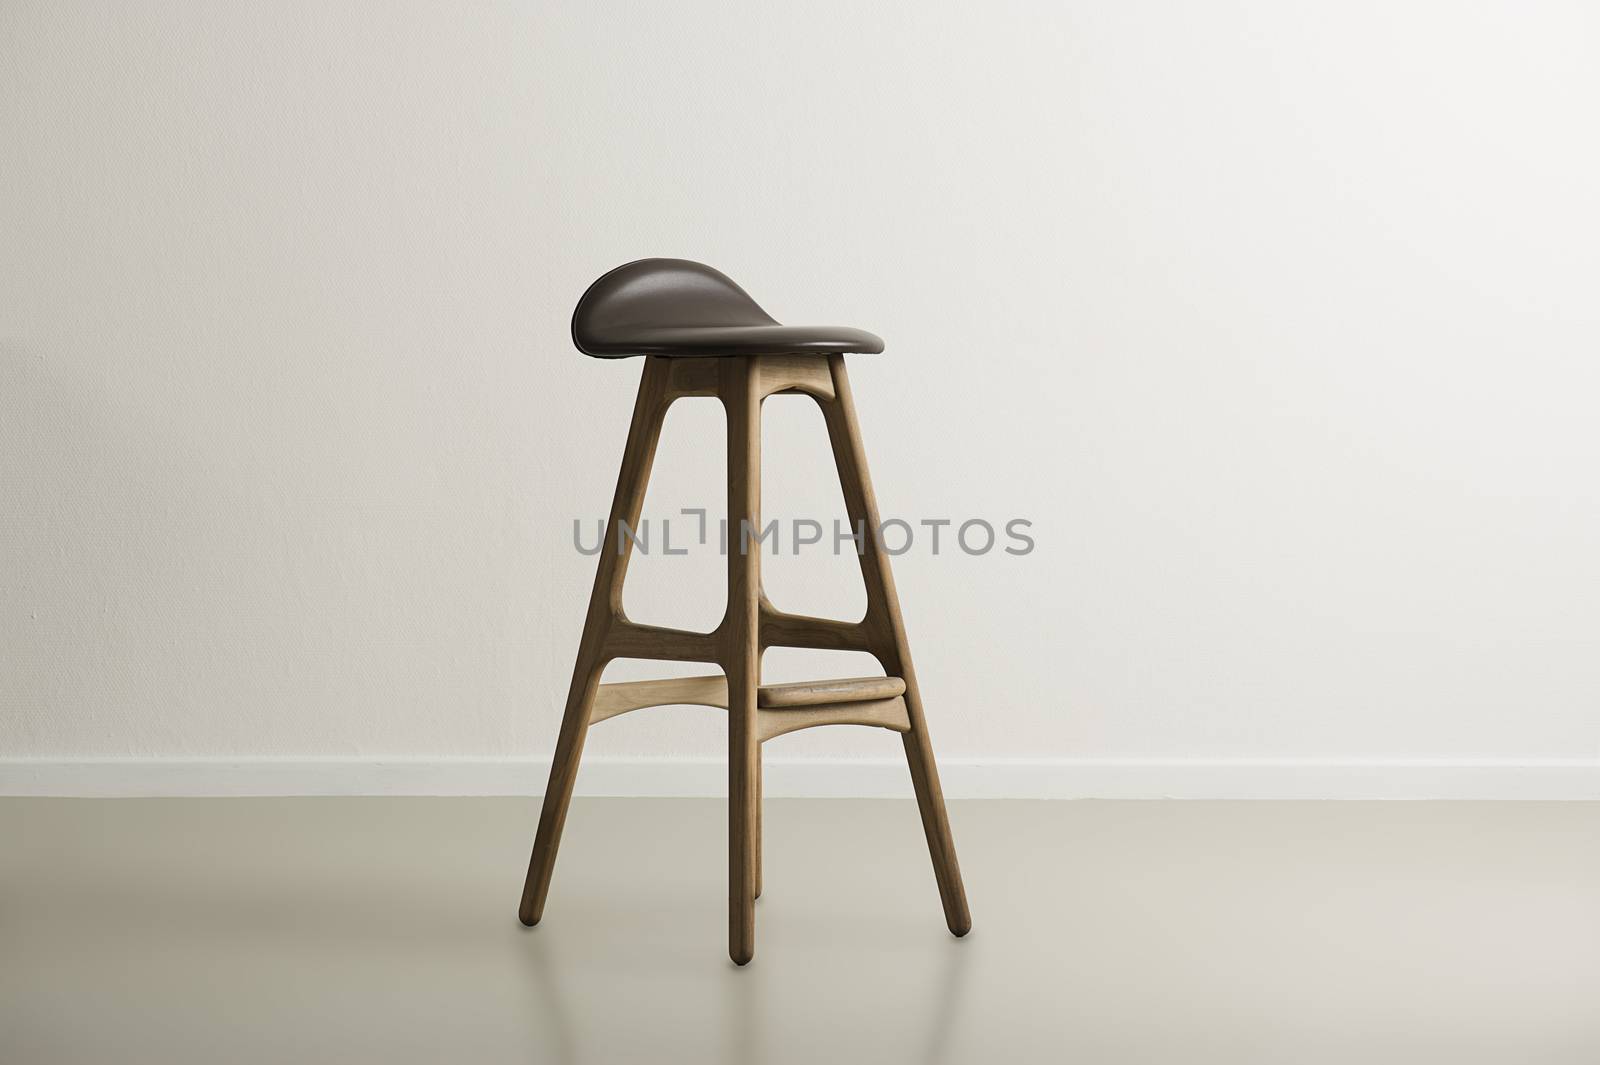 Wooden bar stool with a molded leather seat by MOELLERTHOMSEN